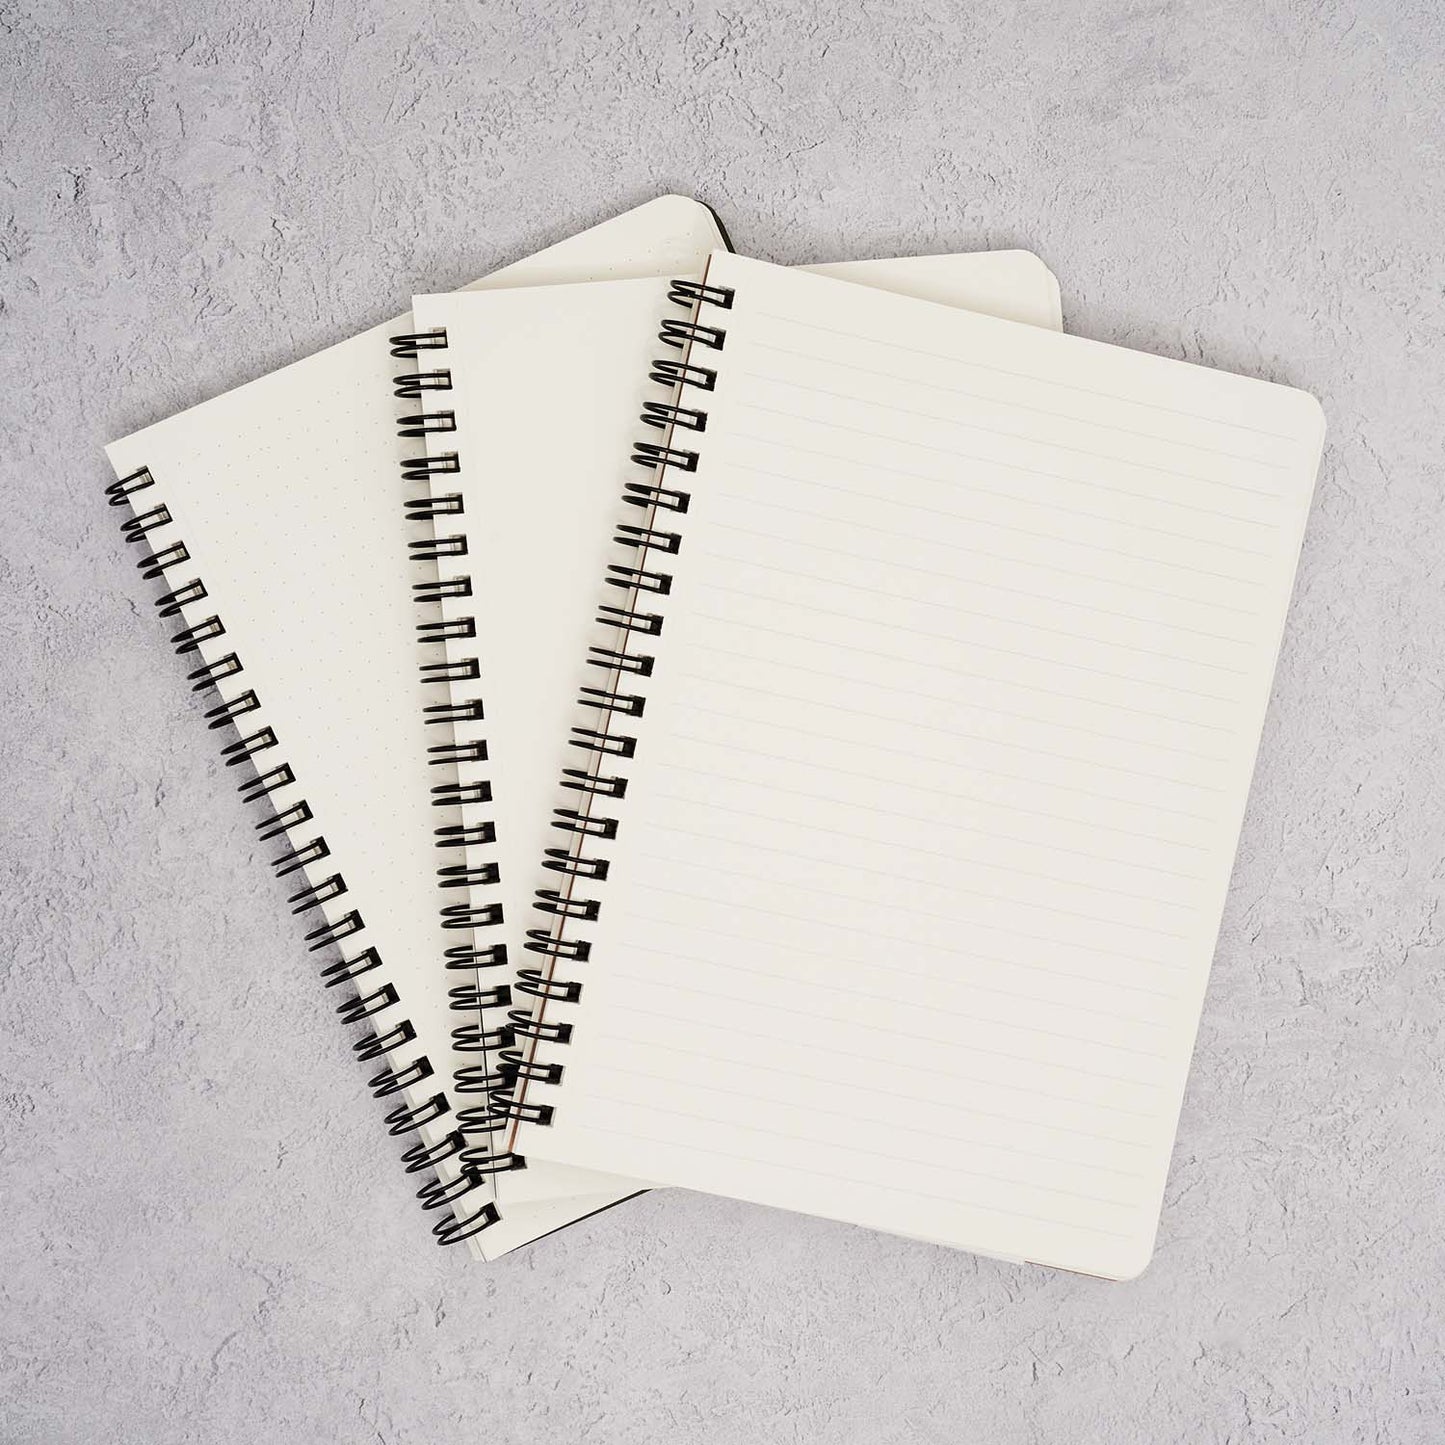 The Paper Mind Cosmo Air Light Twin Ring Notebooks with dot grid lined and blank paper styles